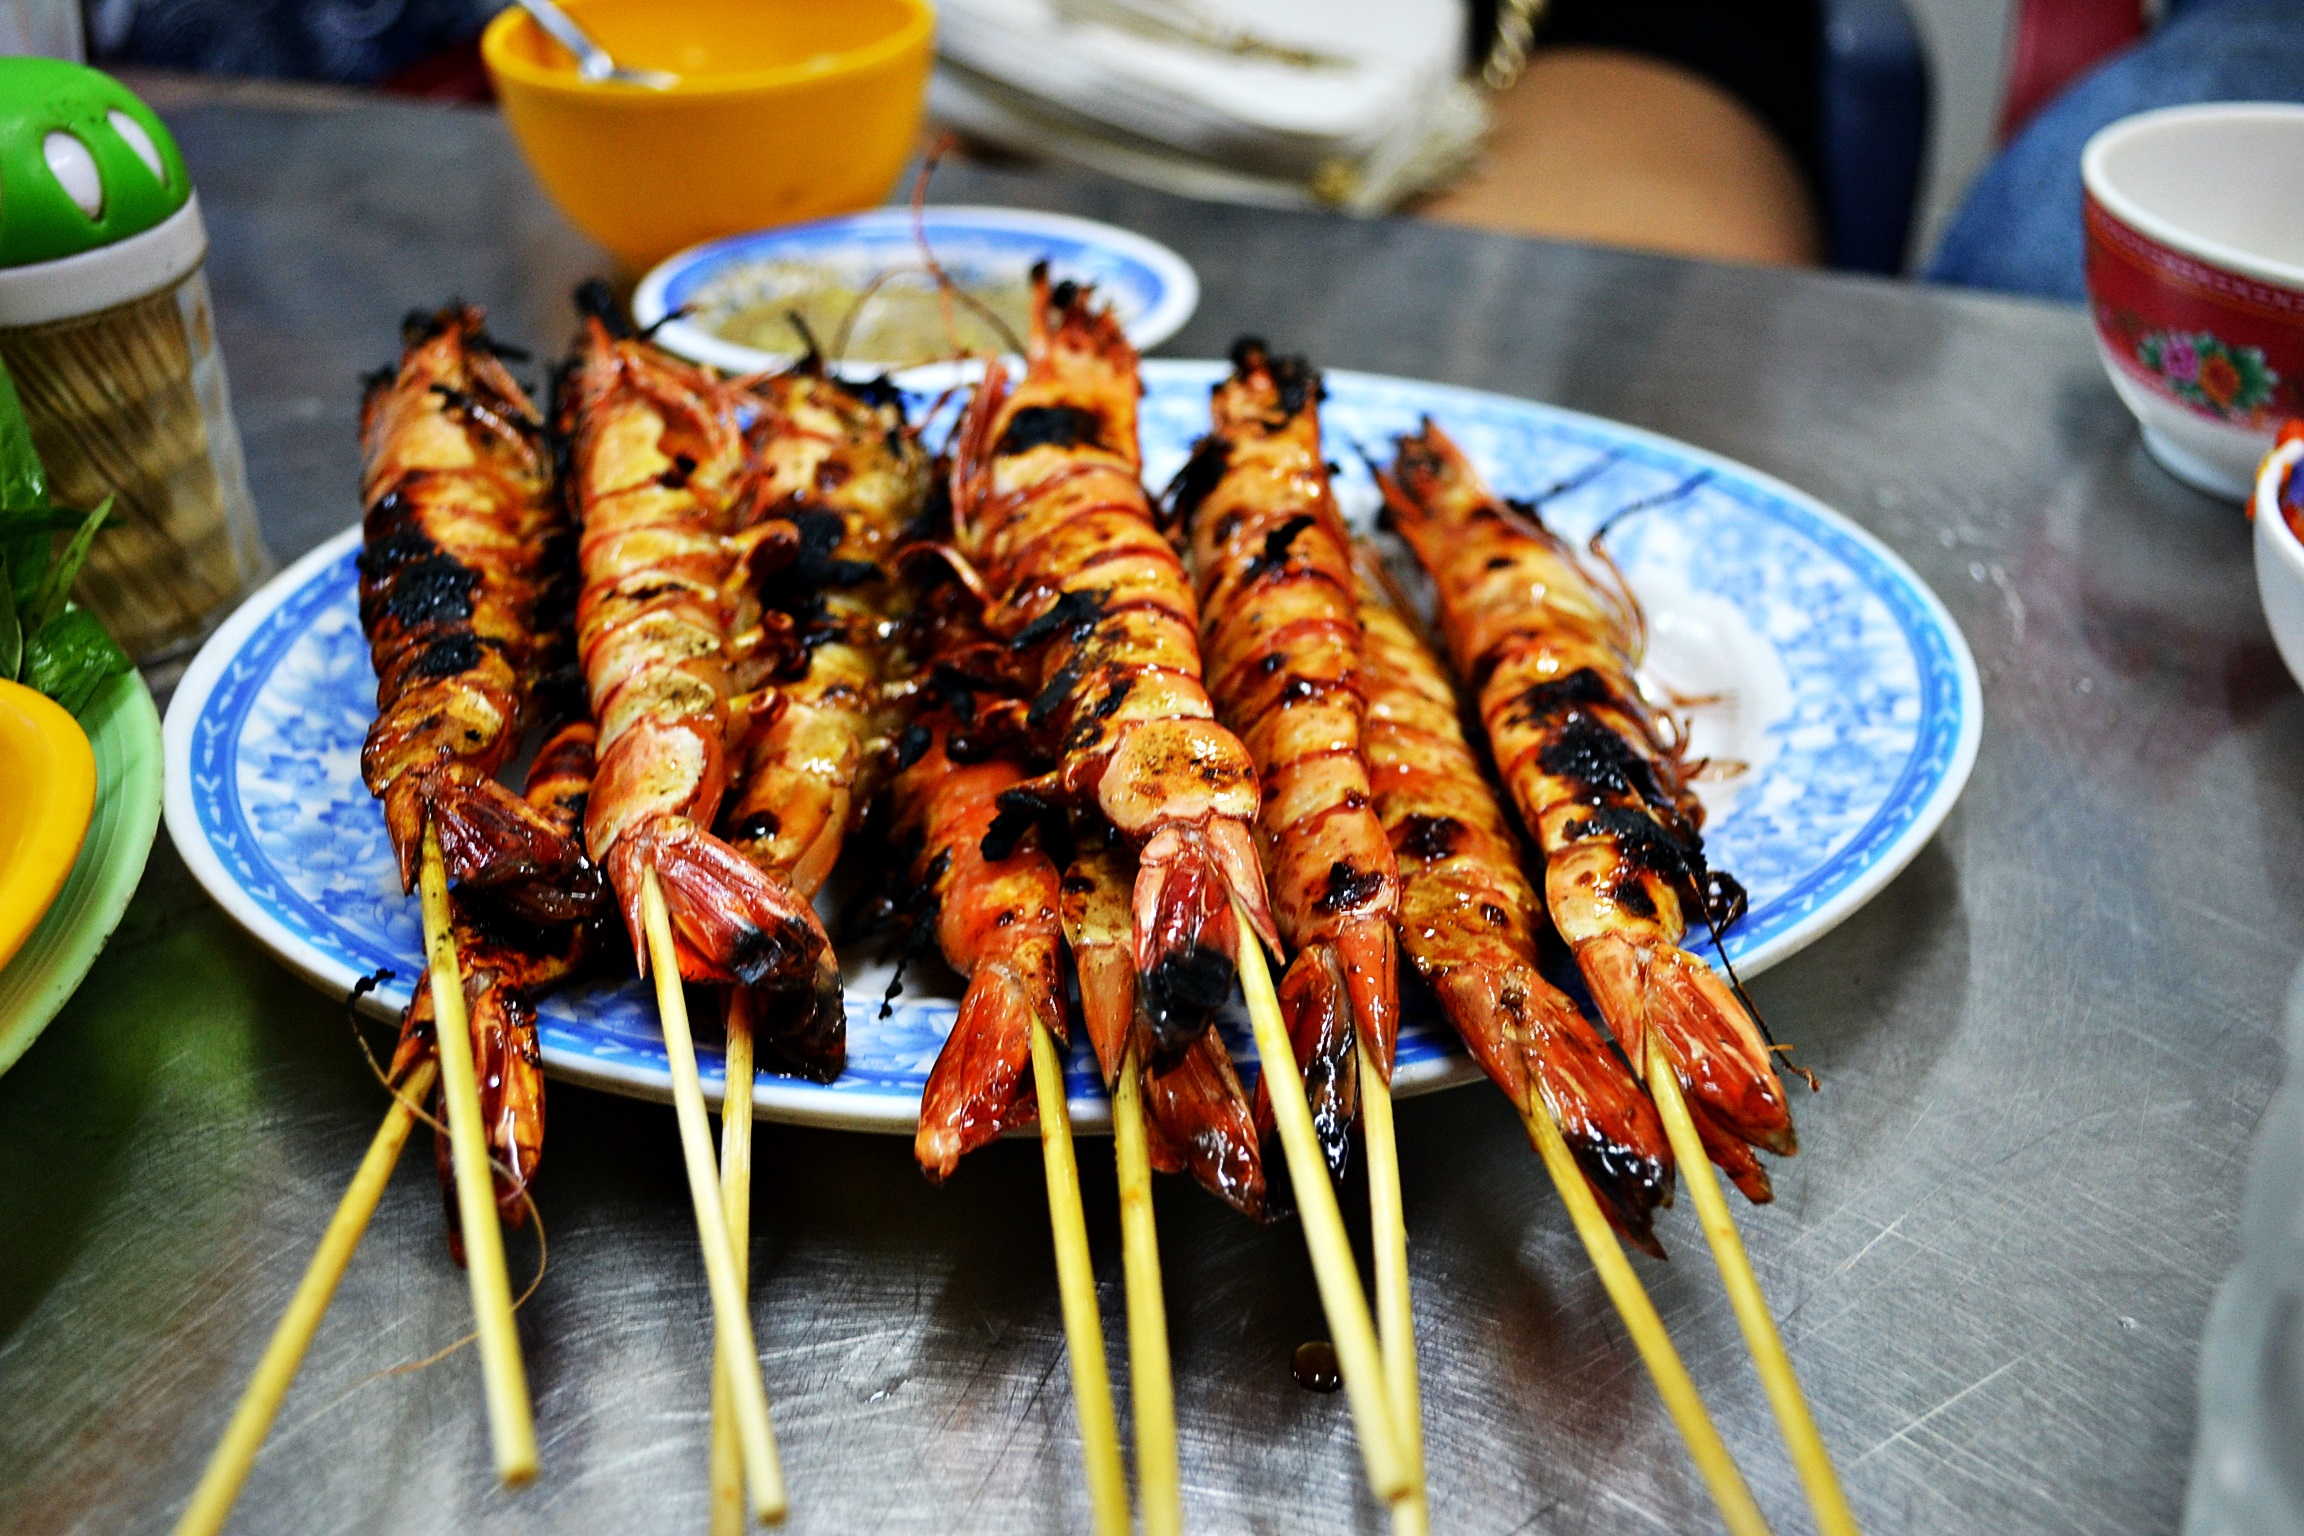 Best One-Day Culinary Tour To Vietnam